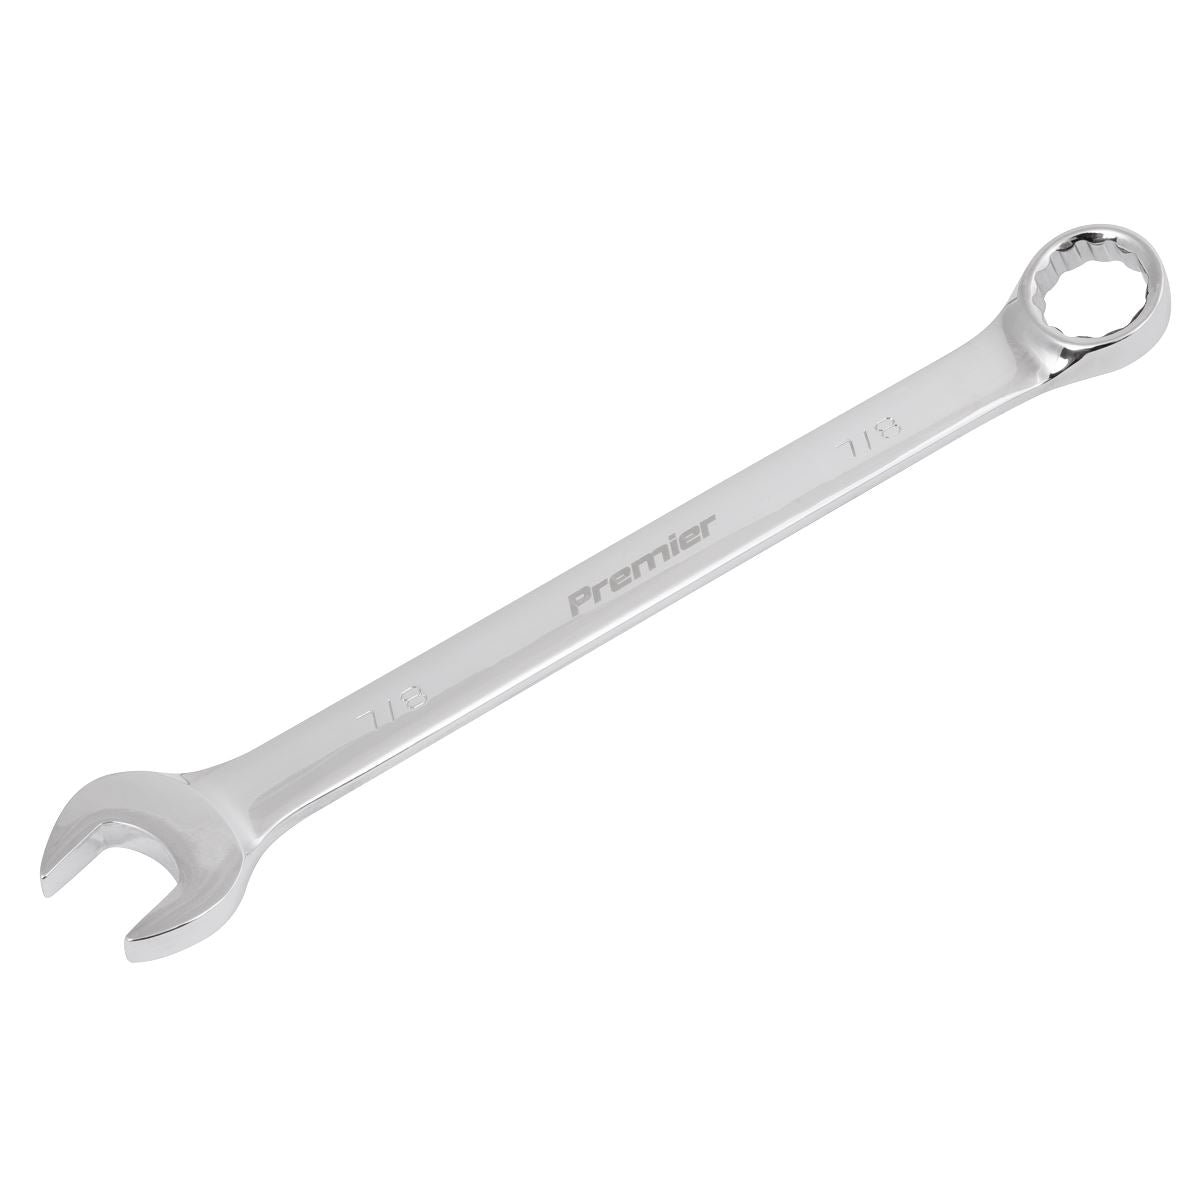 Sealey Premier Combination Spanner 7/8" - Imperial